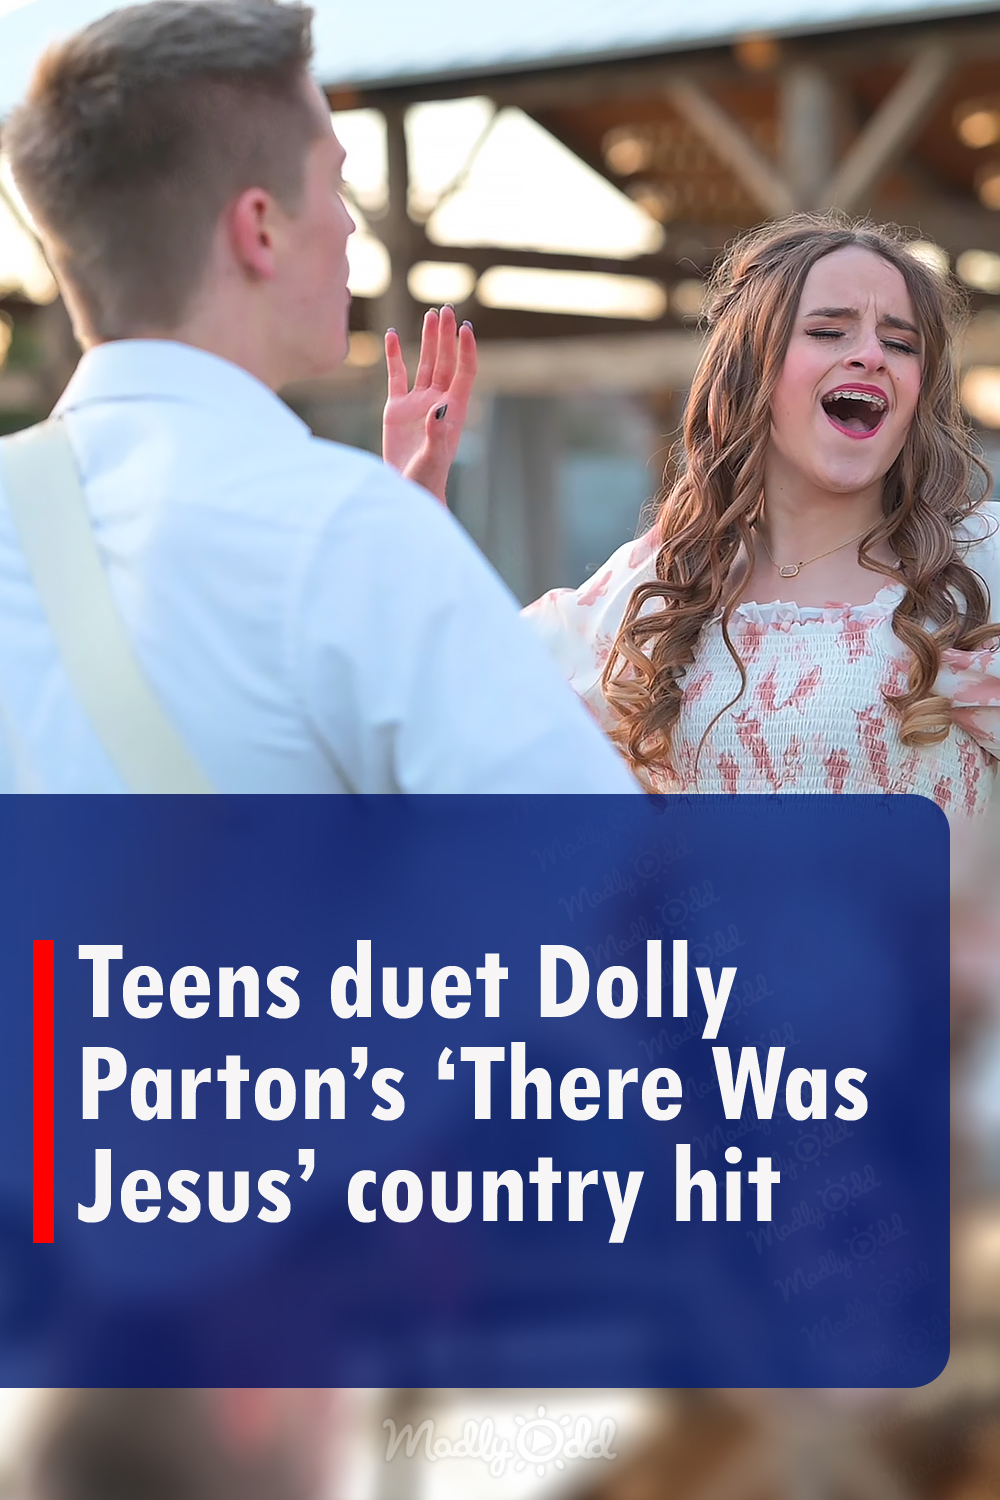 Teens duet of Dolly Parton’s ‘There Was Jesus’ country hit